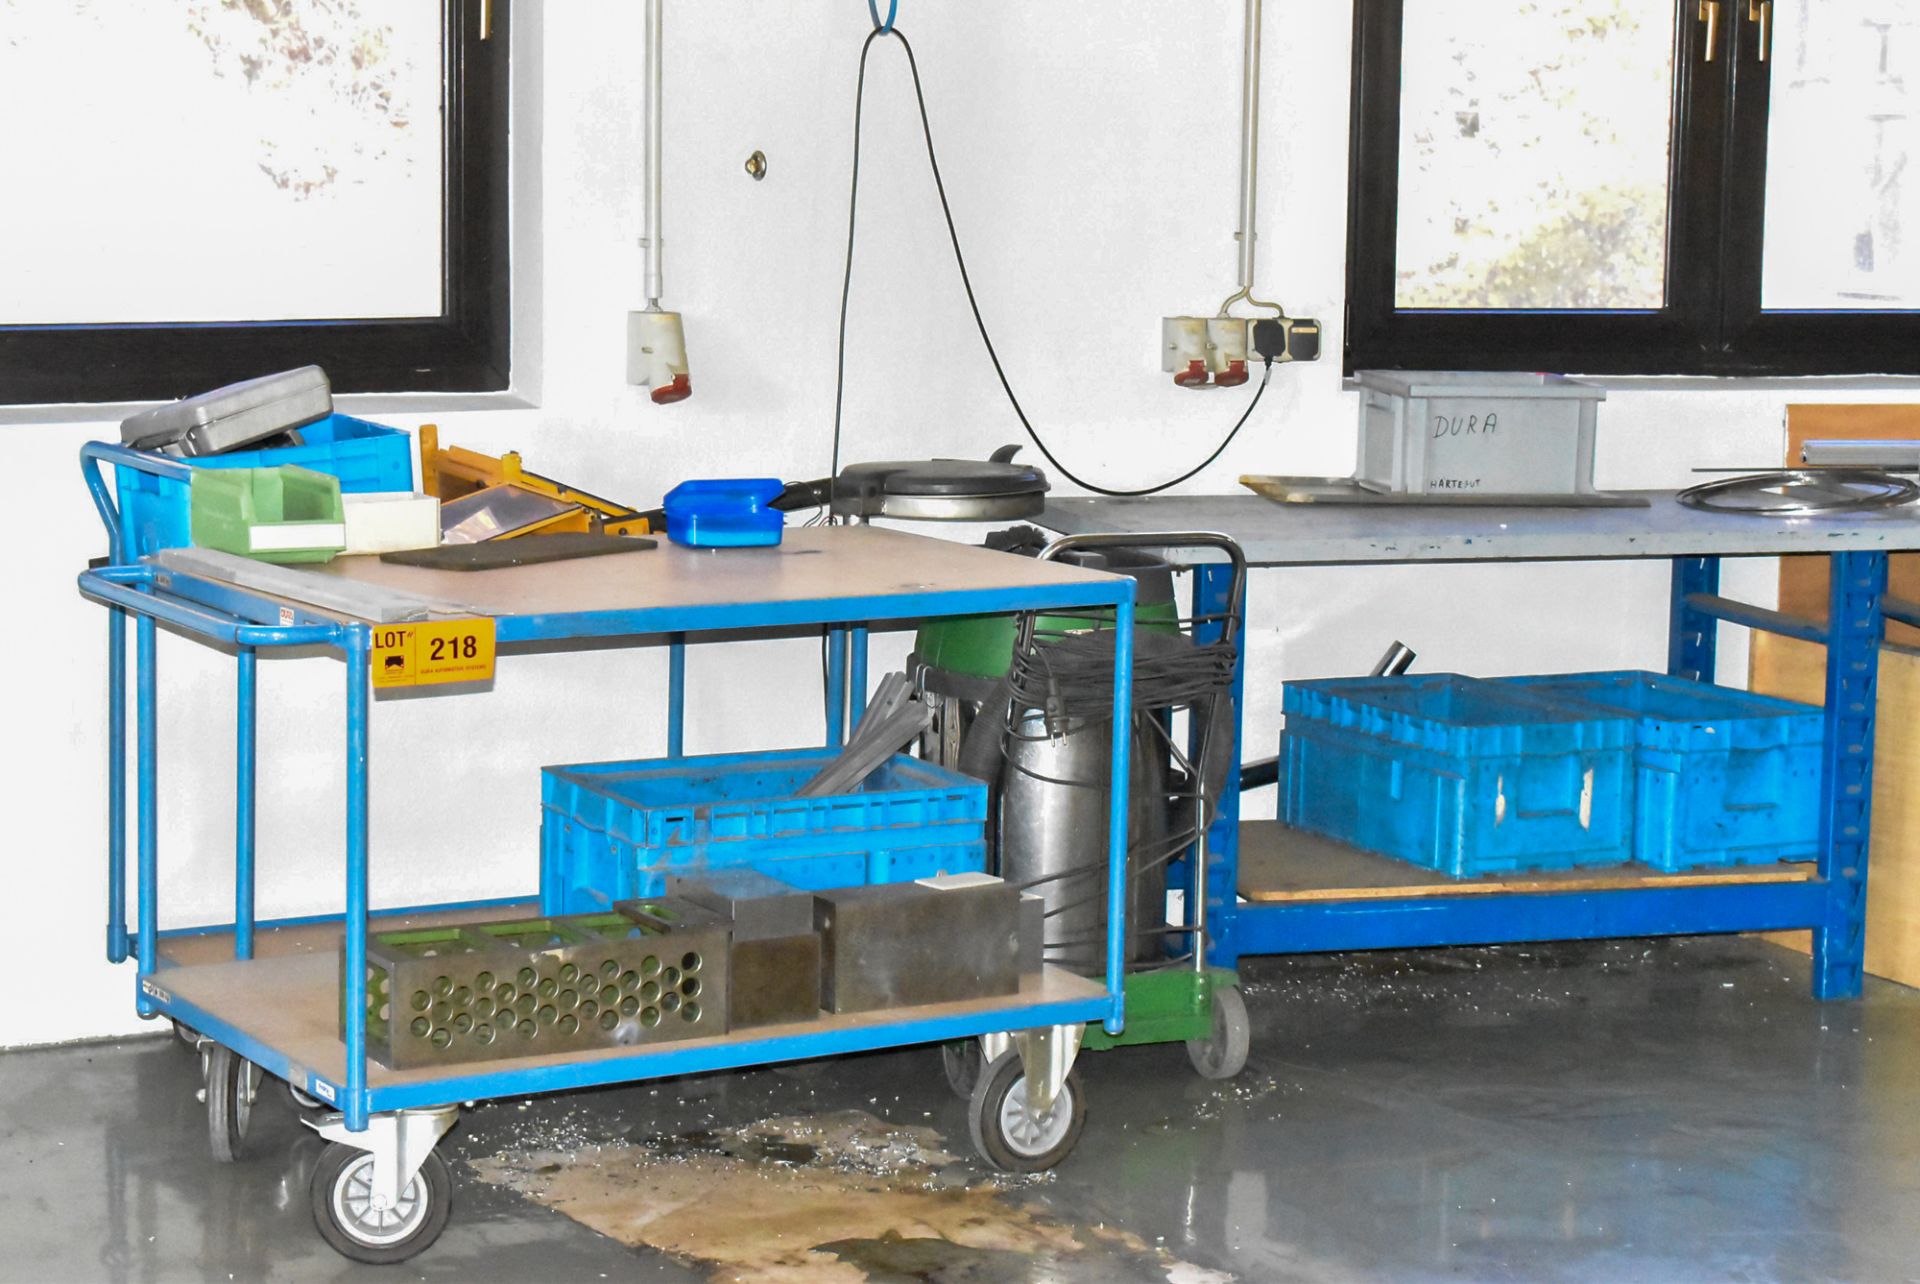 LOT/ ROLLING SHOP CARTS WITH PARTS AND SUPPLIES (BAU 13) [Removal Fee = € 22 + applicable VAT -